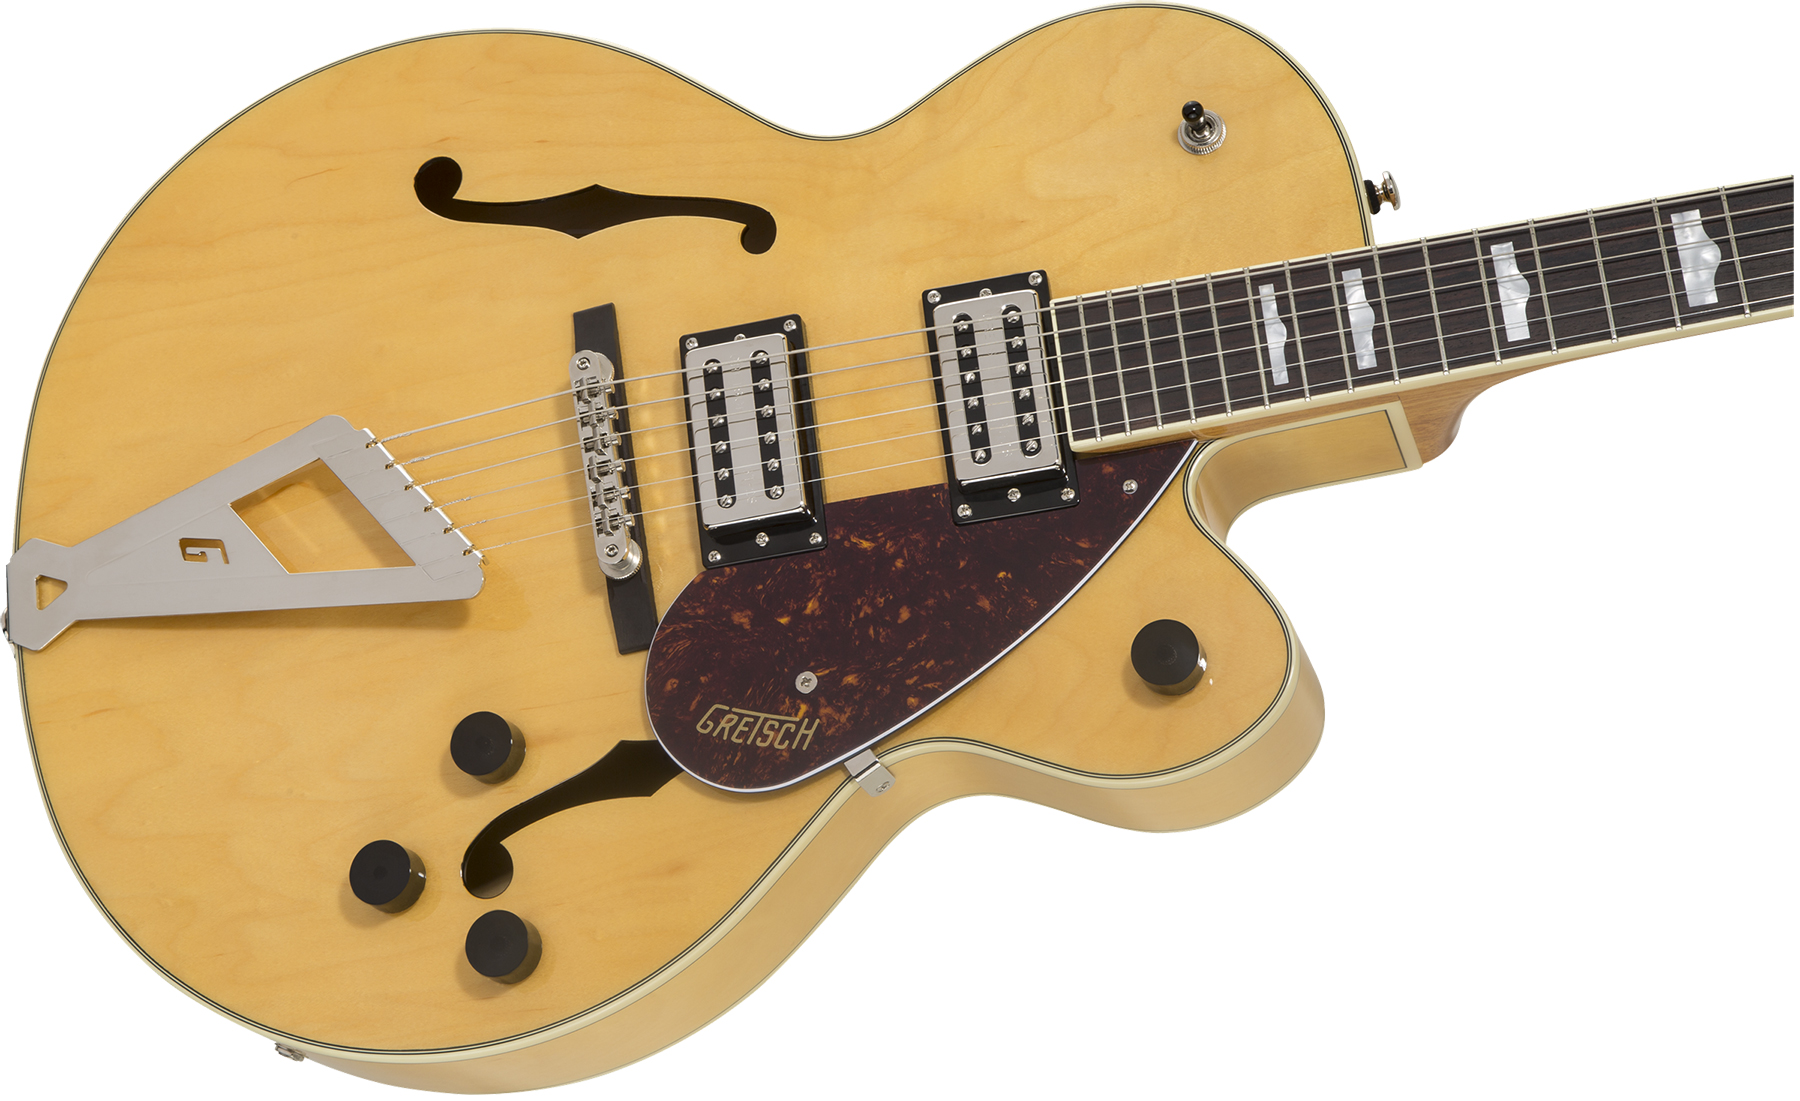 Gretsch G2420 Streamliner Hollow Body With Chromatic Ii Hh Ht Lau - Village Amber - Guitare Électrique 1/2 Caisse - Variation 2